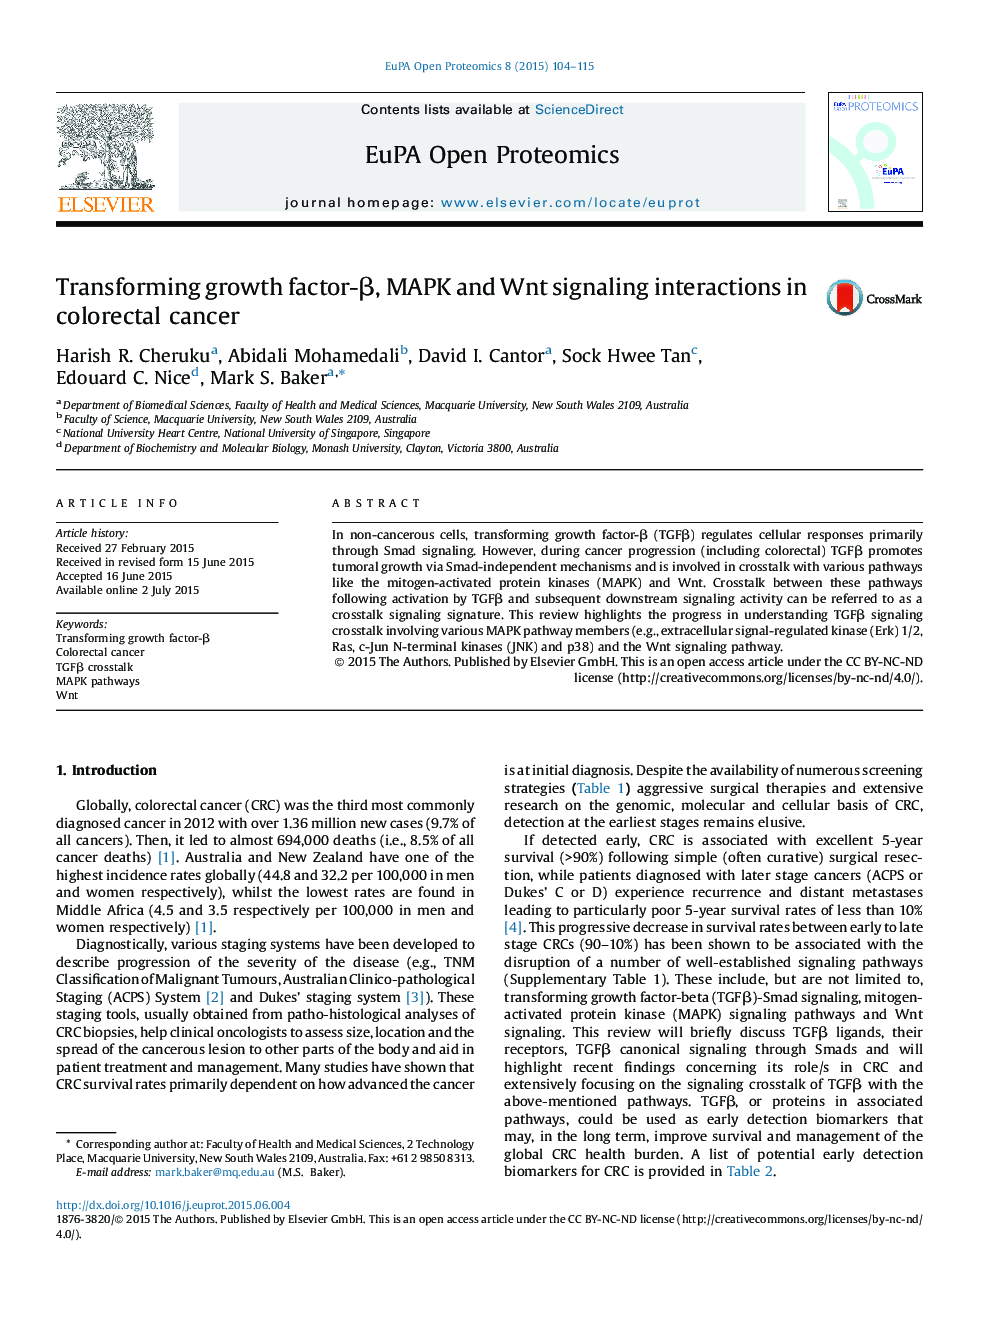 Transforming growth factor-β, MAPK and Wnt signaling interactions in colorectal cancer